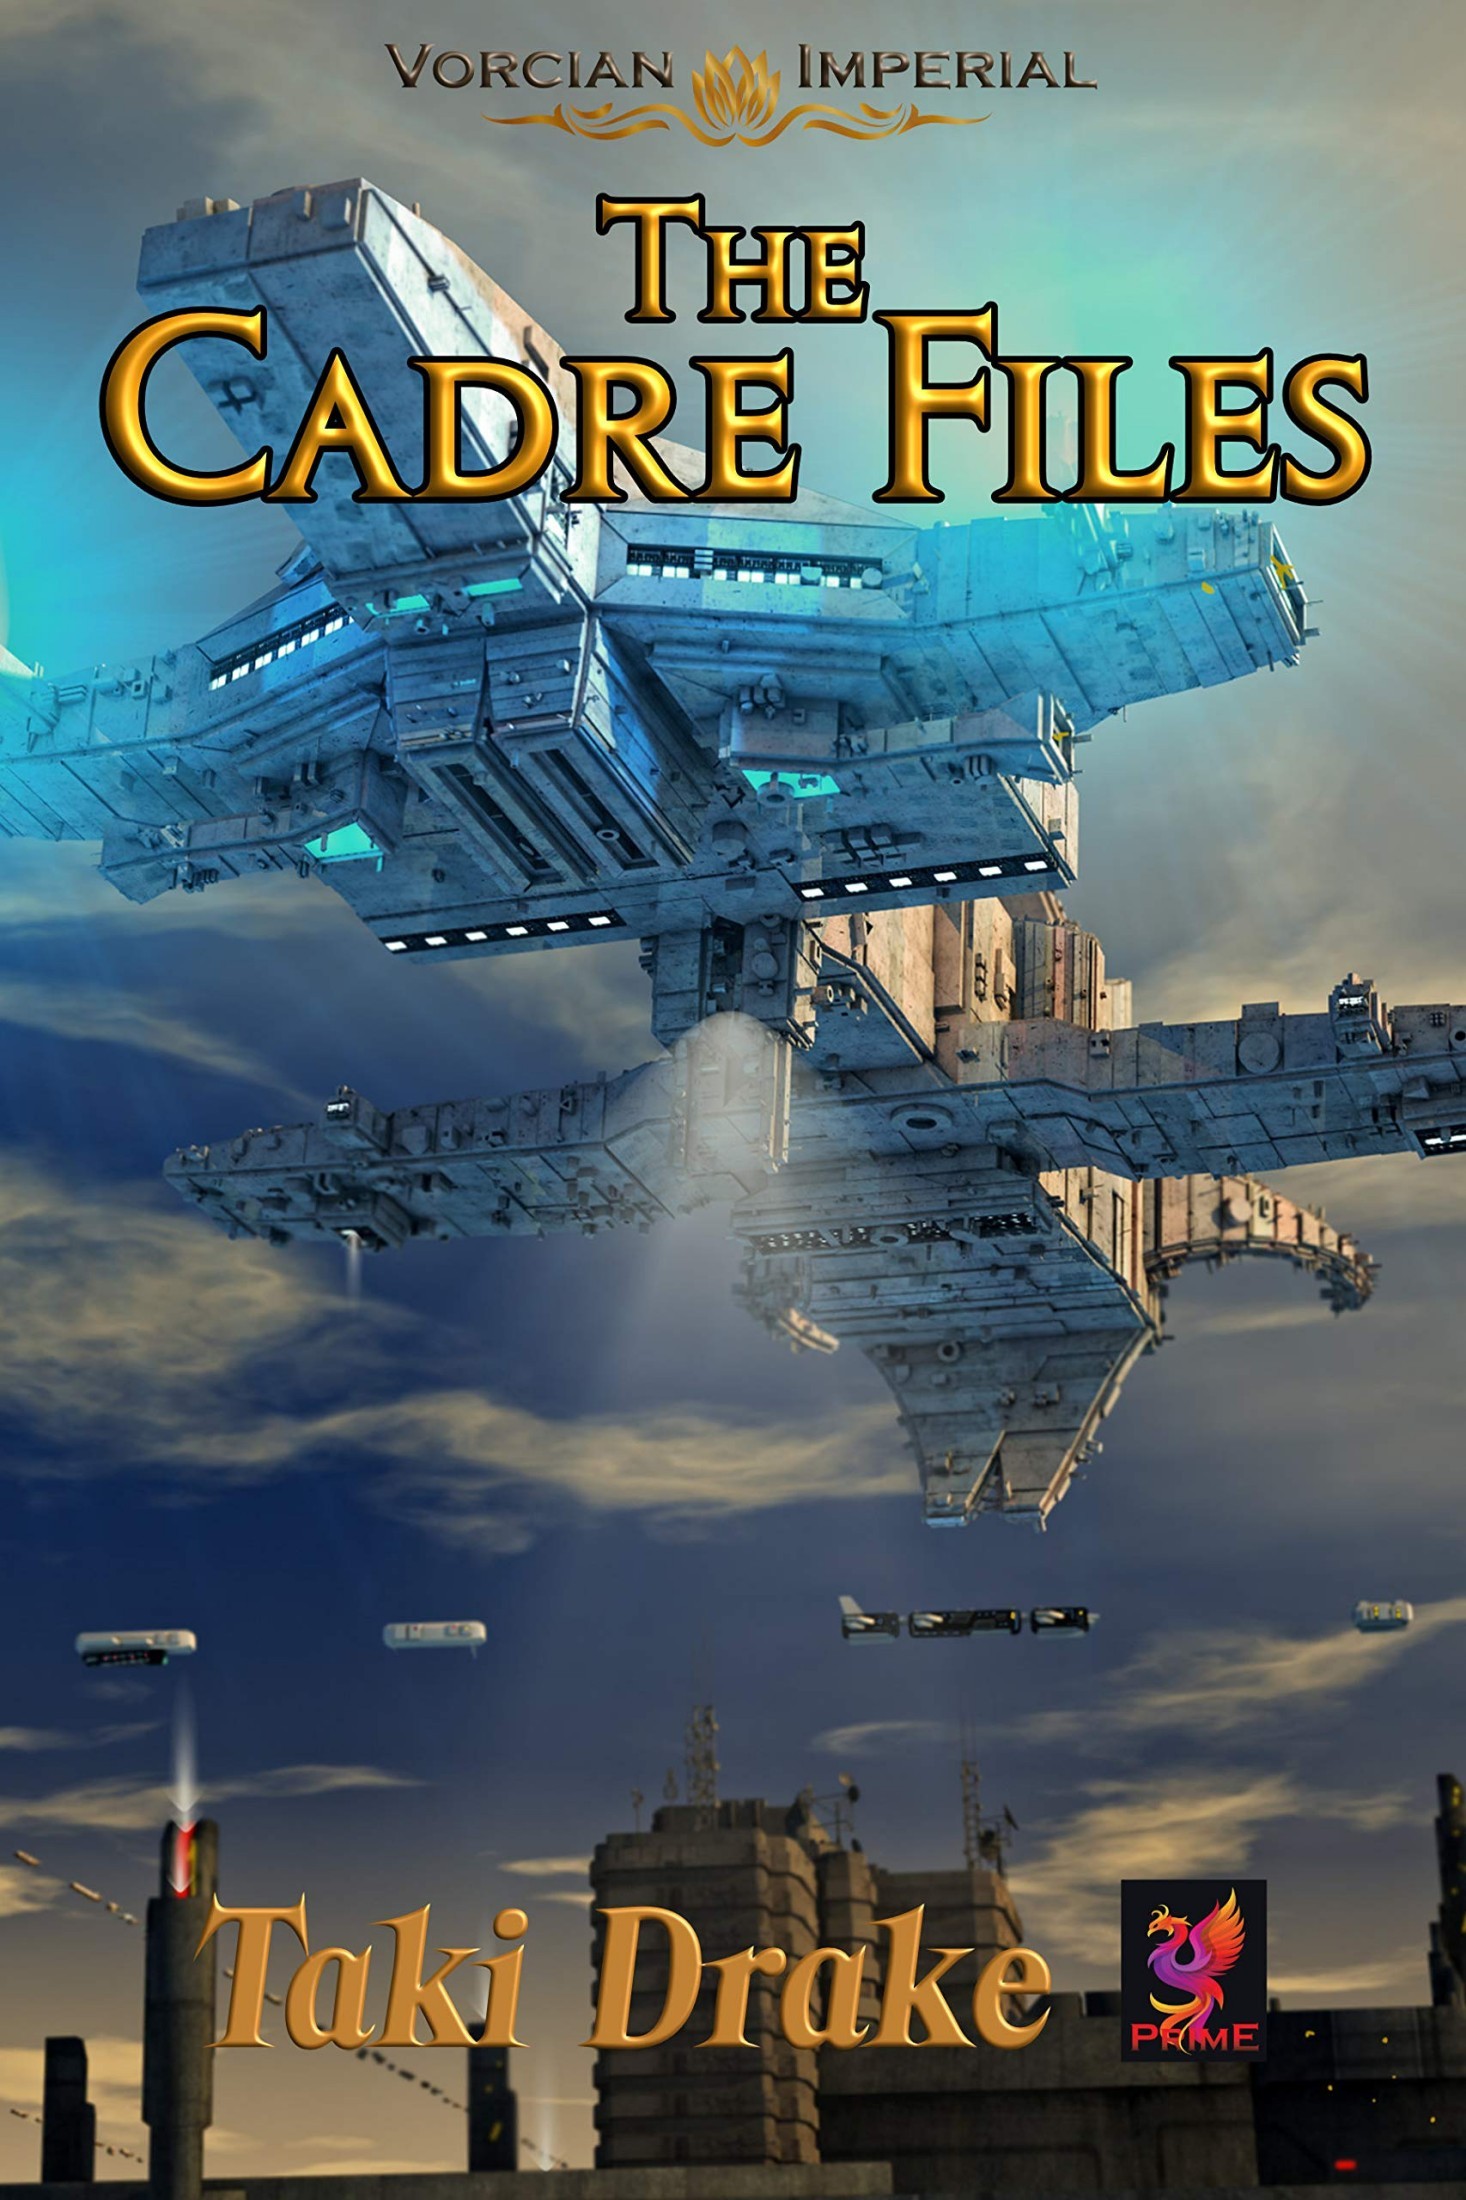 The Cadre Files